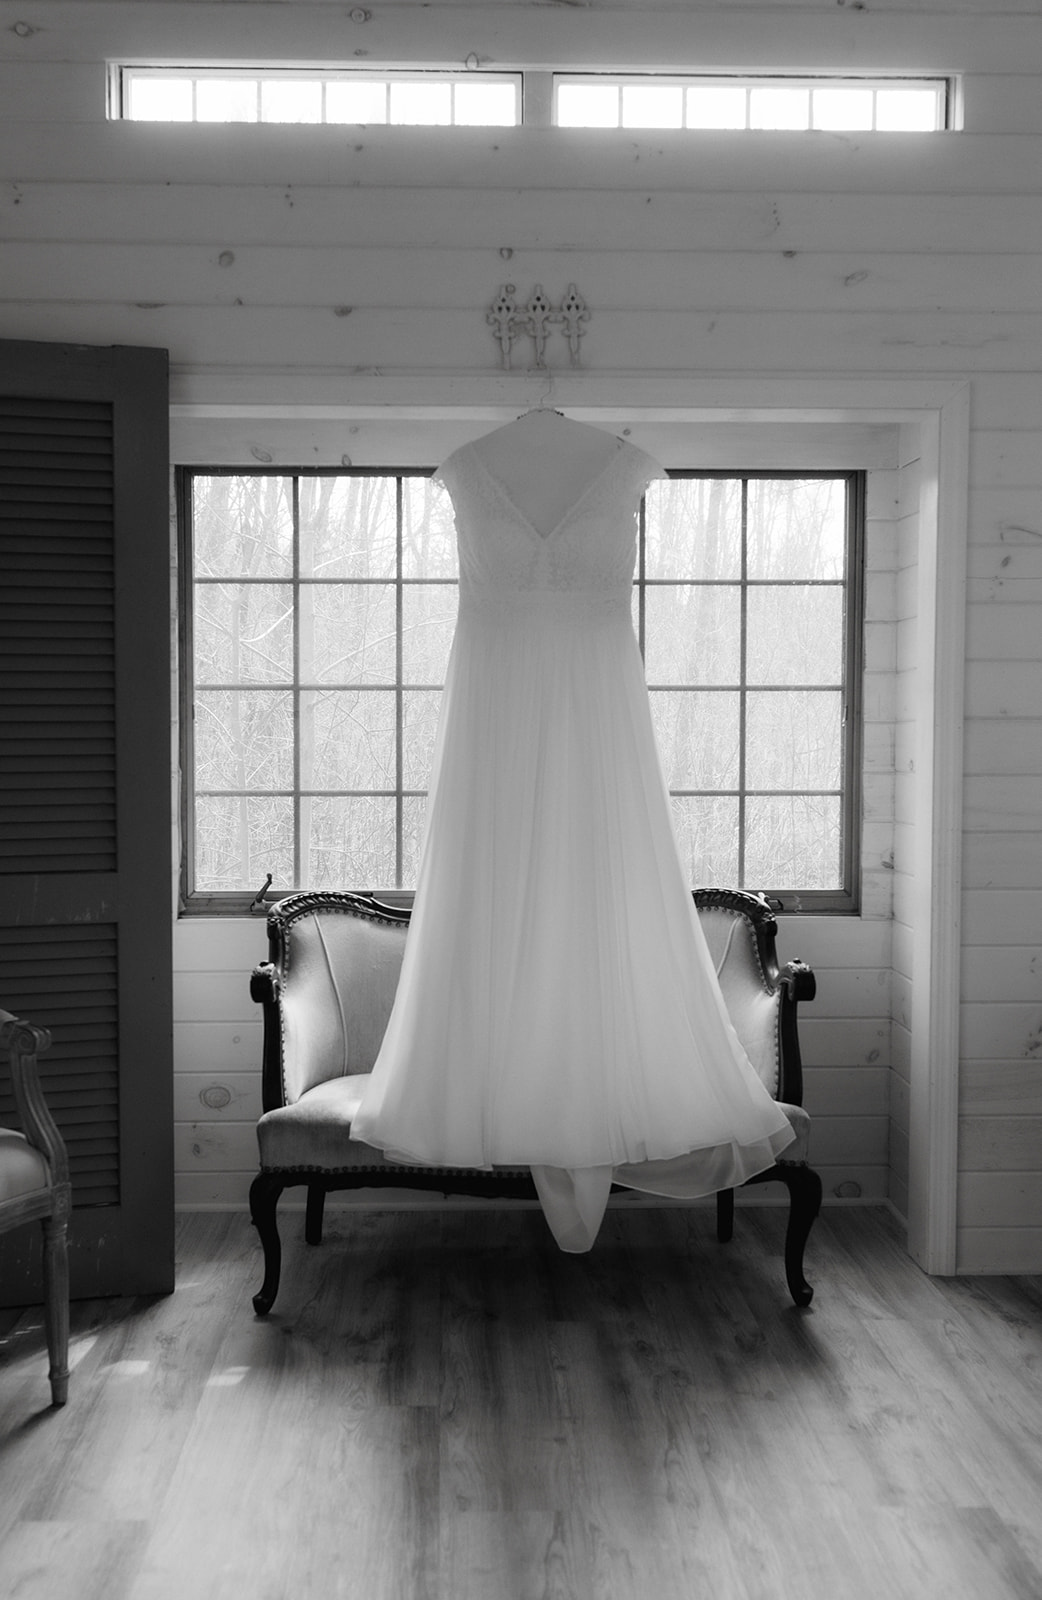 wedding dress hanging up ready for the dreamy upstate New York wedding